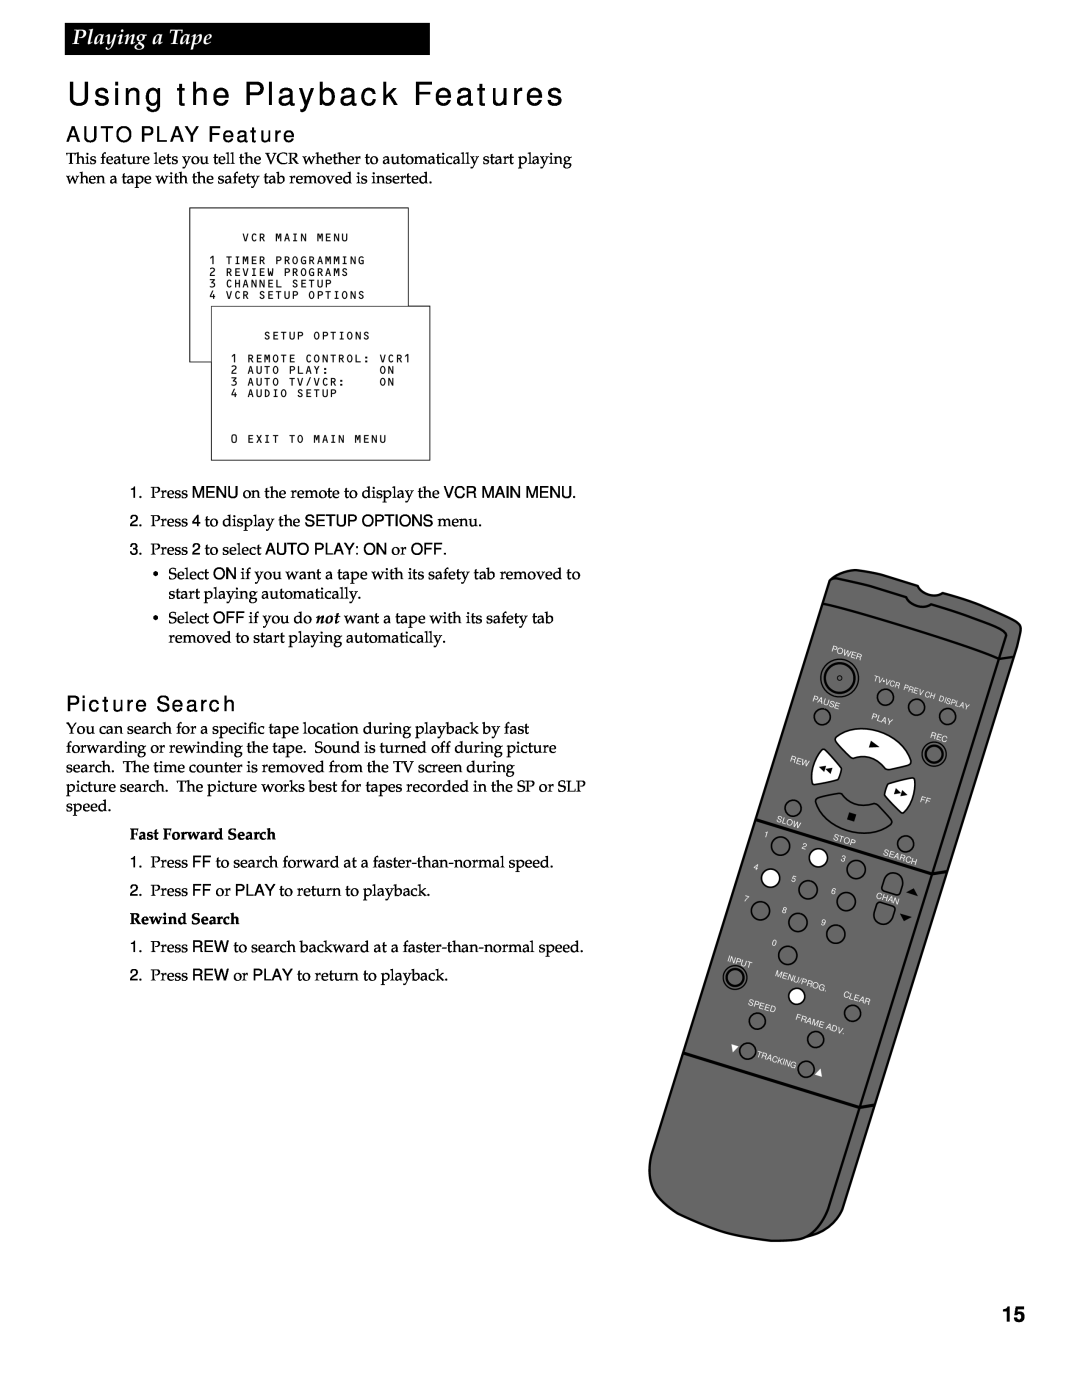 RCA VR602HF manual Using the Playback Features, AUTO PLAY Feature, Picture Search, Fast Forward Search, Rewind Search 